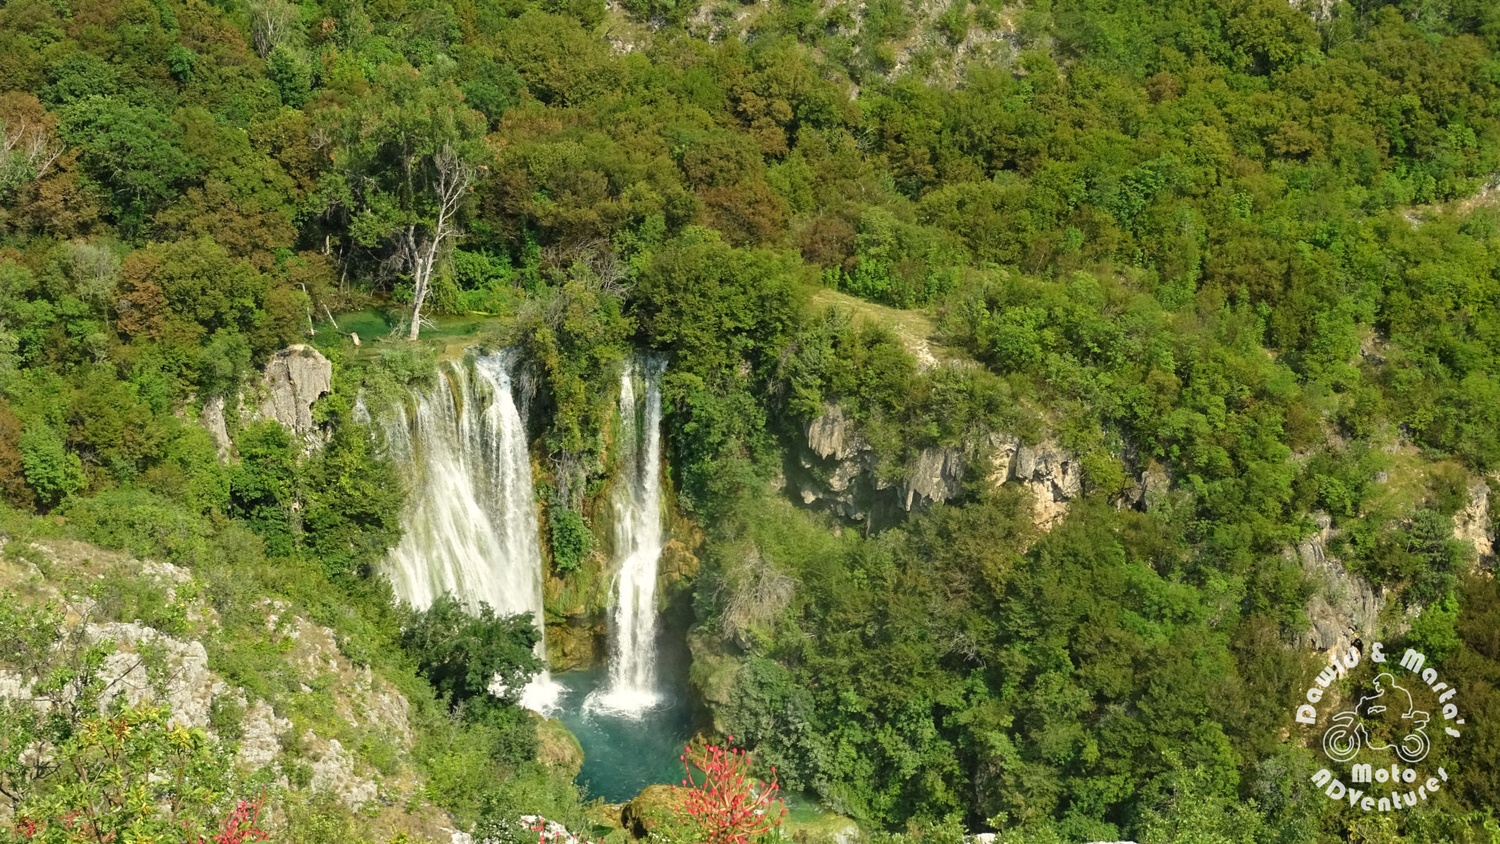 Manojlovac waterfall seen from the Krk River canyon top, inland Croatia